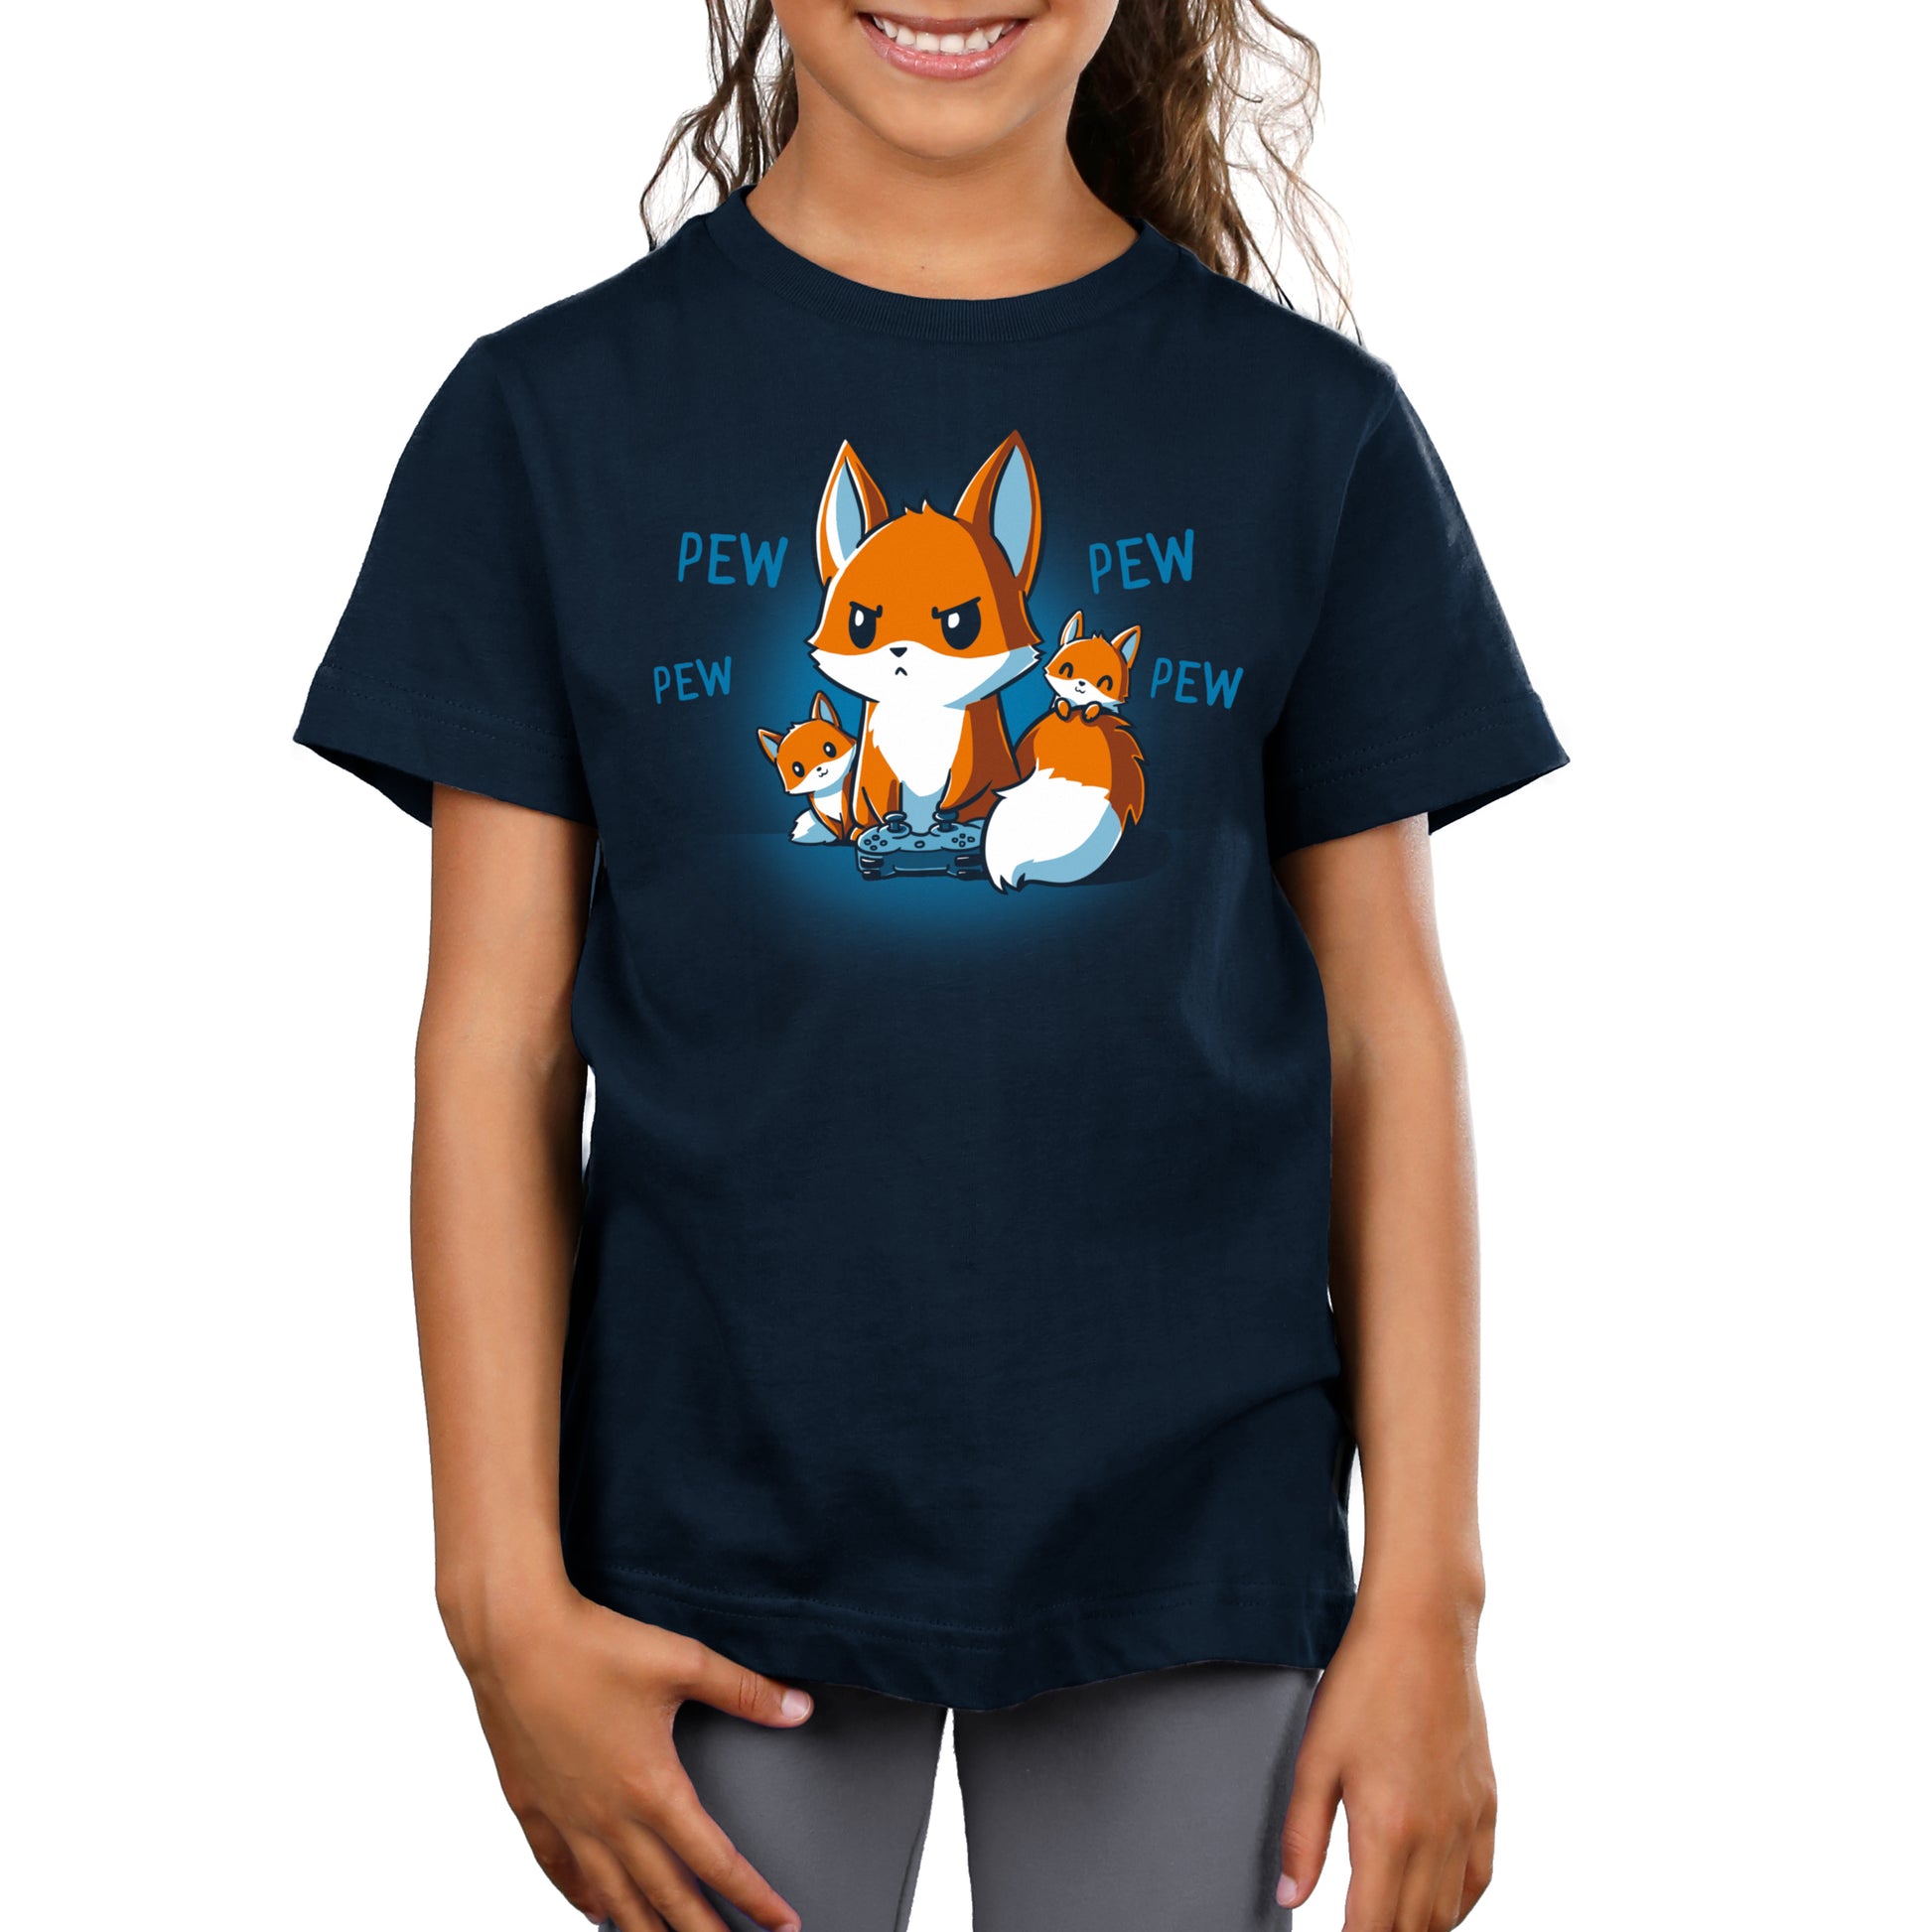 A child wearing a monsterdigital Pew Pew Parent original navy blue t-shirt, crafted from super soft ringspun cotton, featuring an illustration of a fox and three smaller foxes with the text "Pew Pew Pew" around them.